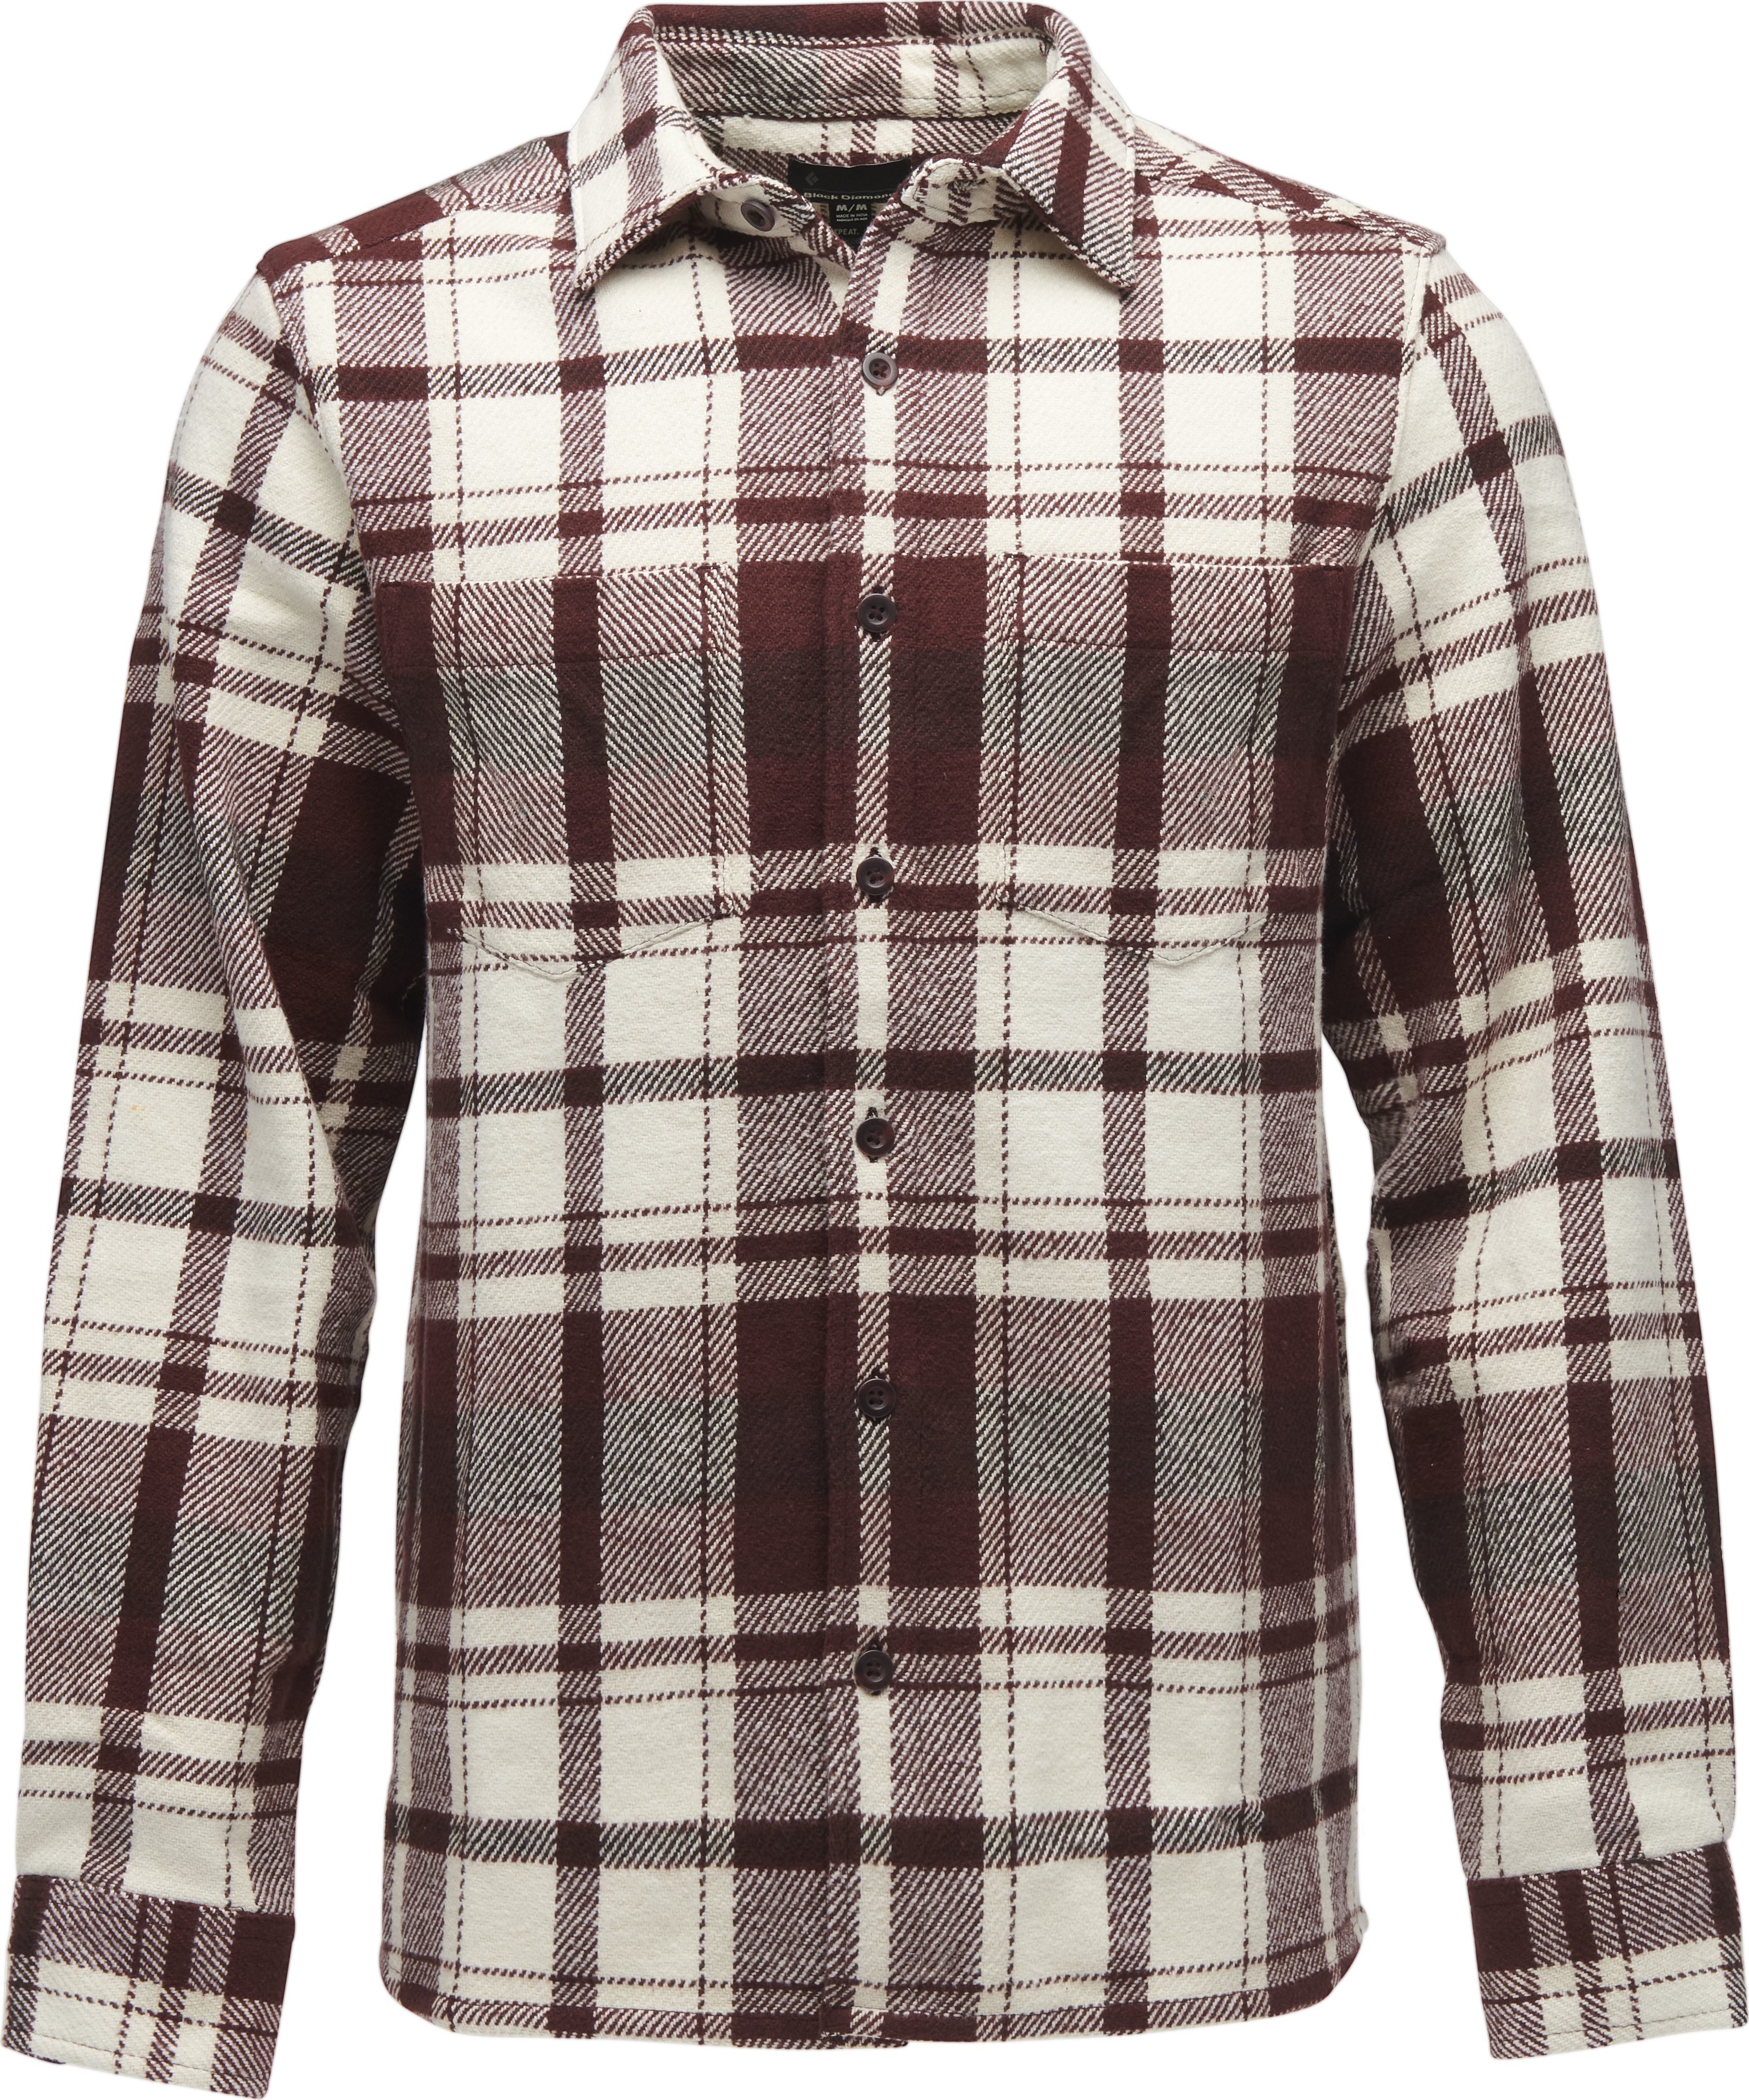 Men’s Project Heavy Flannel Burgundy-Off White Plaid